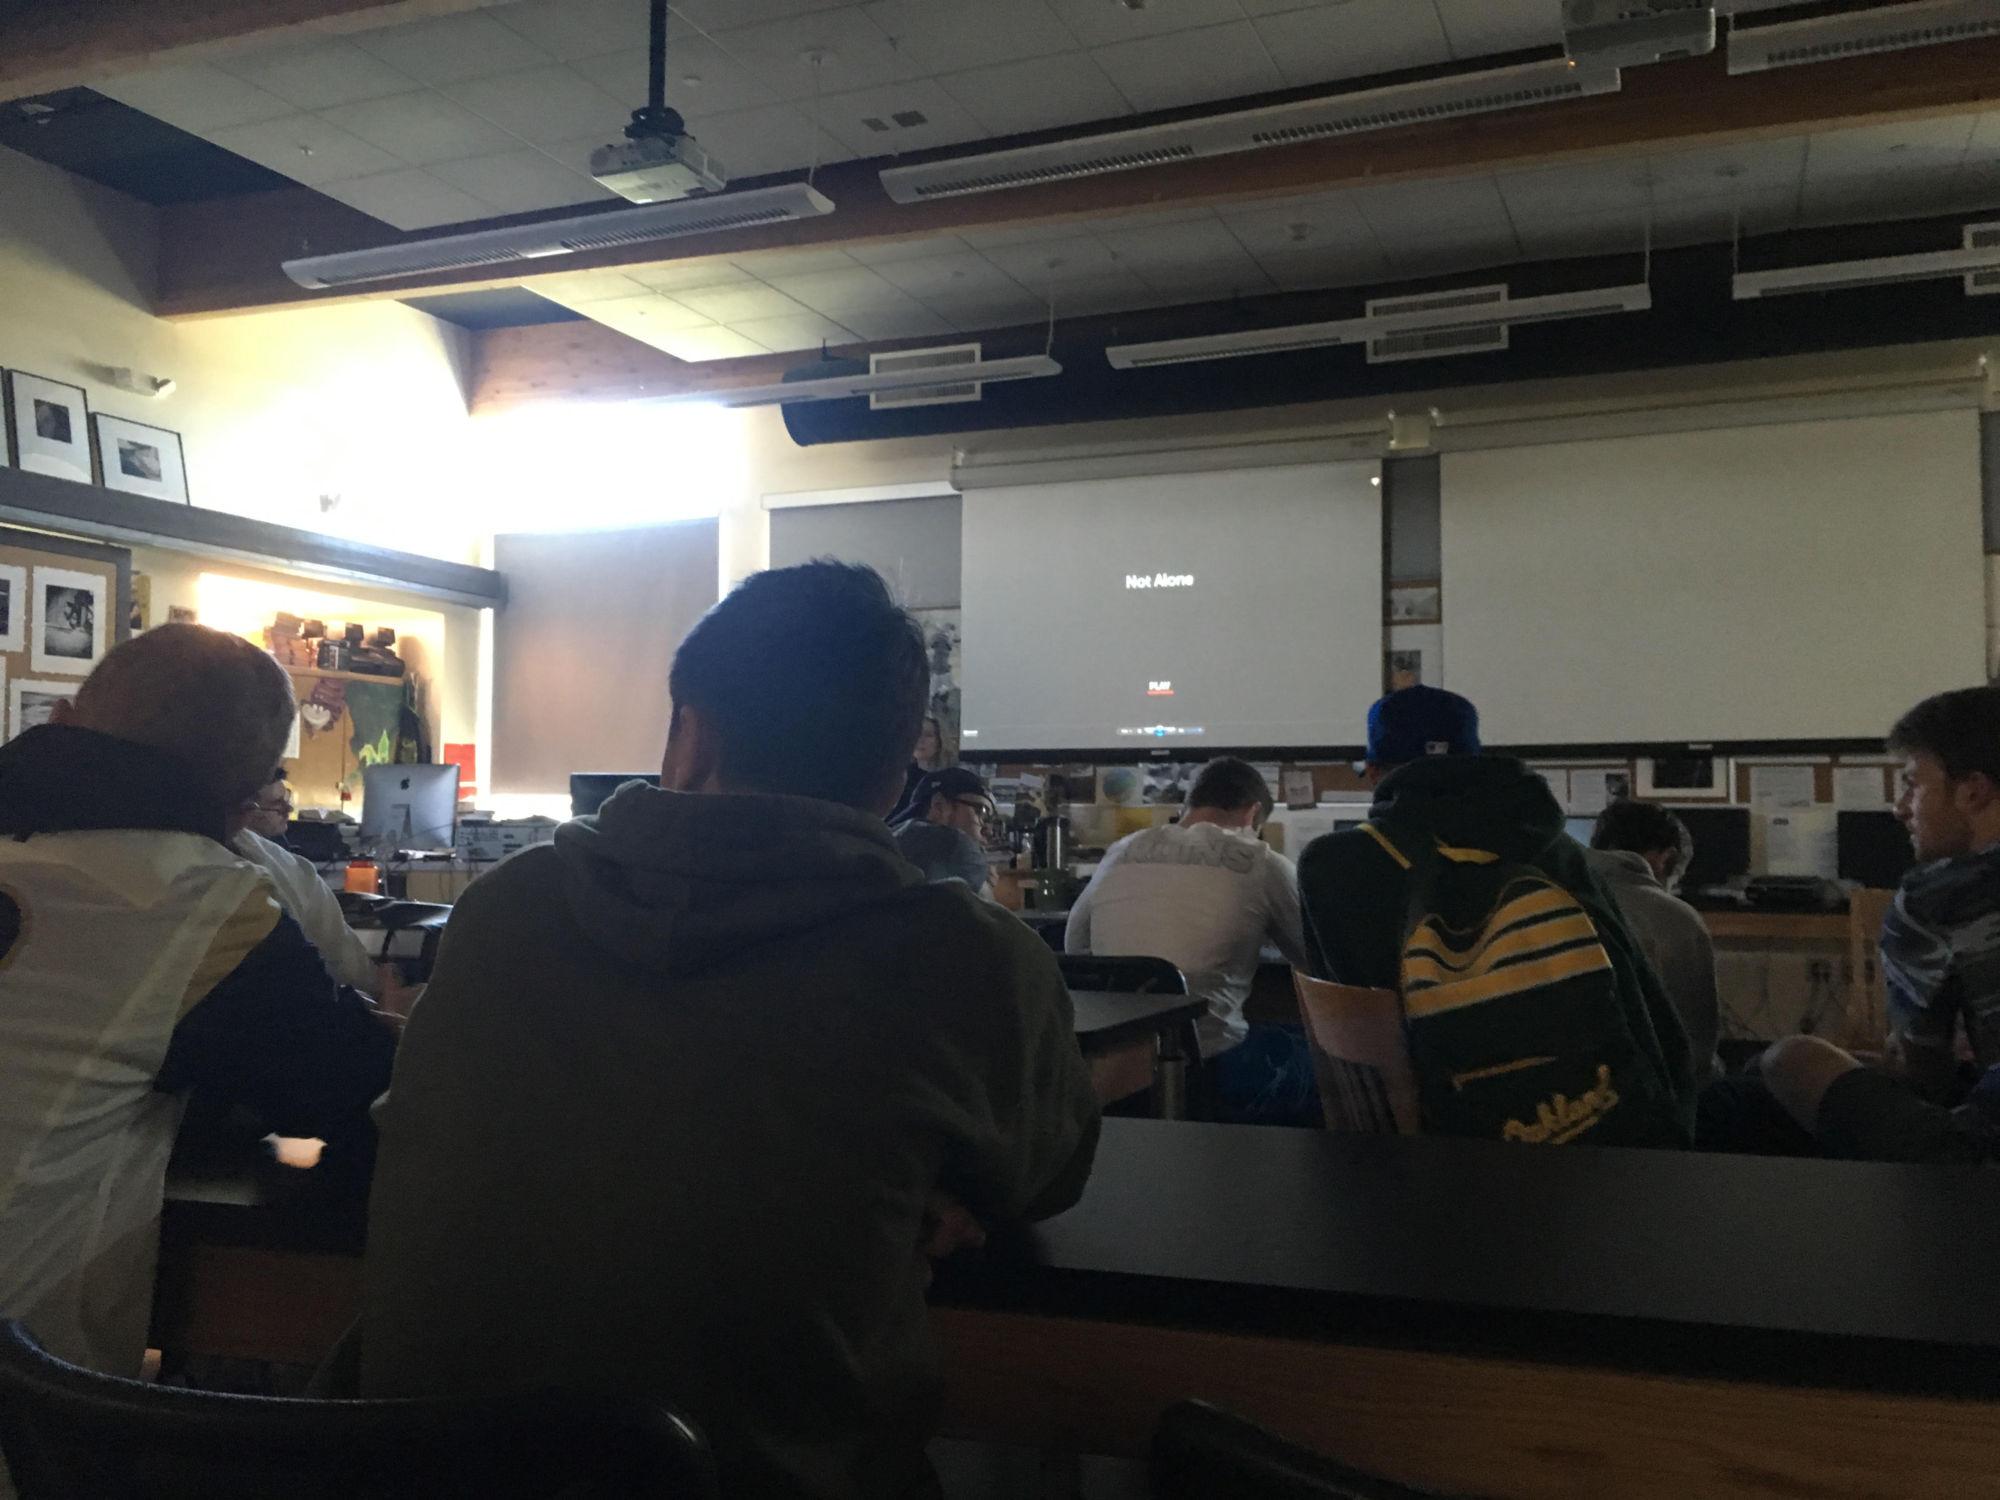 Students watch the screening of Not Alone in the Photo classroom